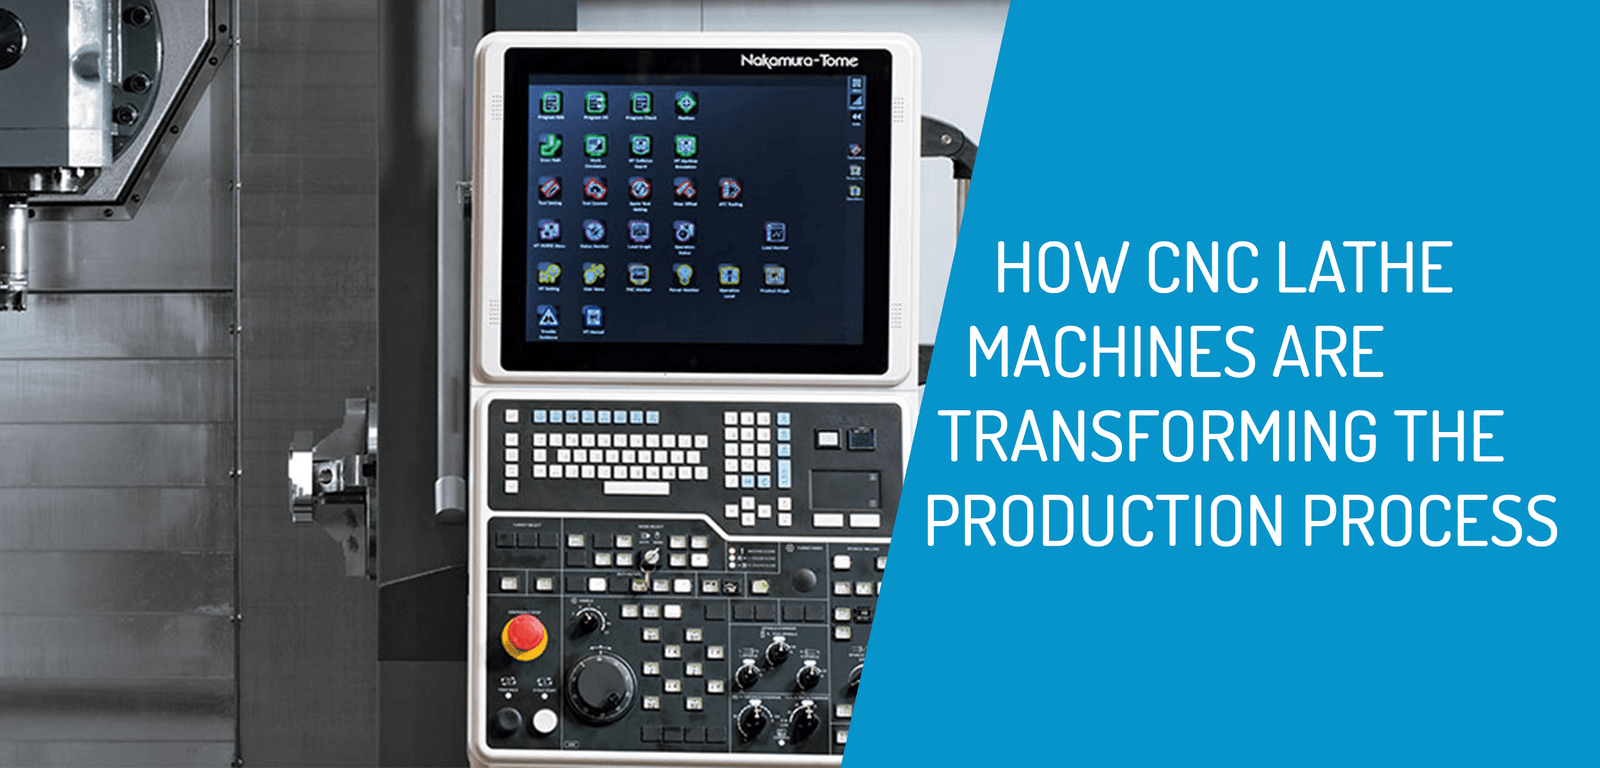 How CNC Lathe Machines are Transforming the Production Process